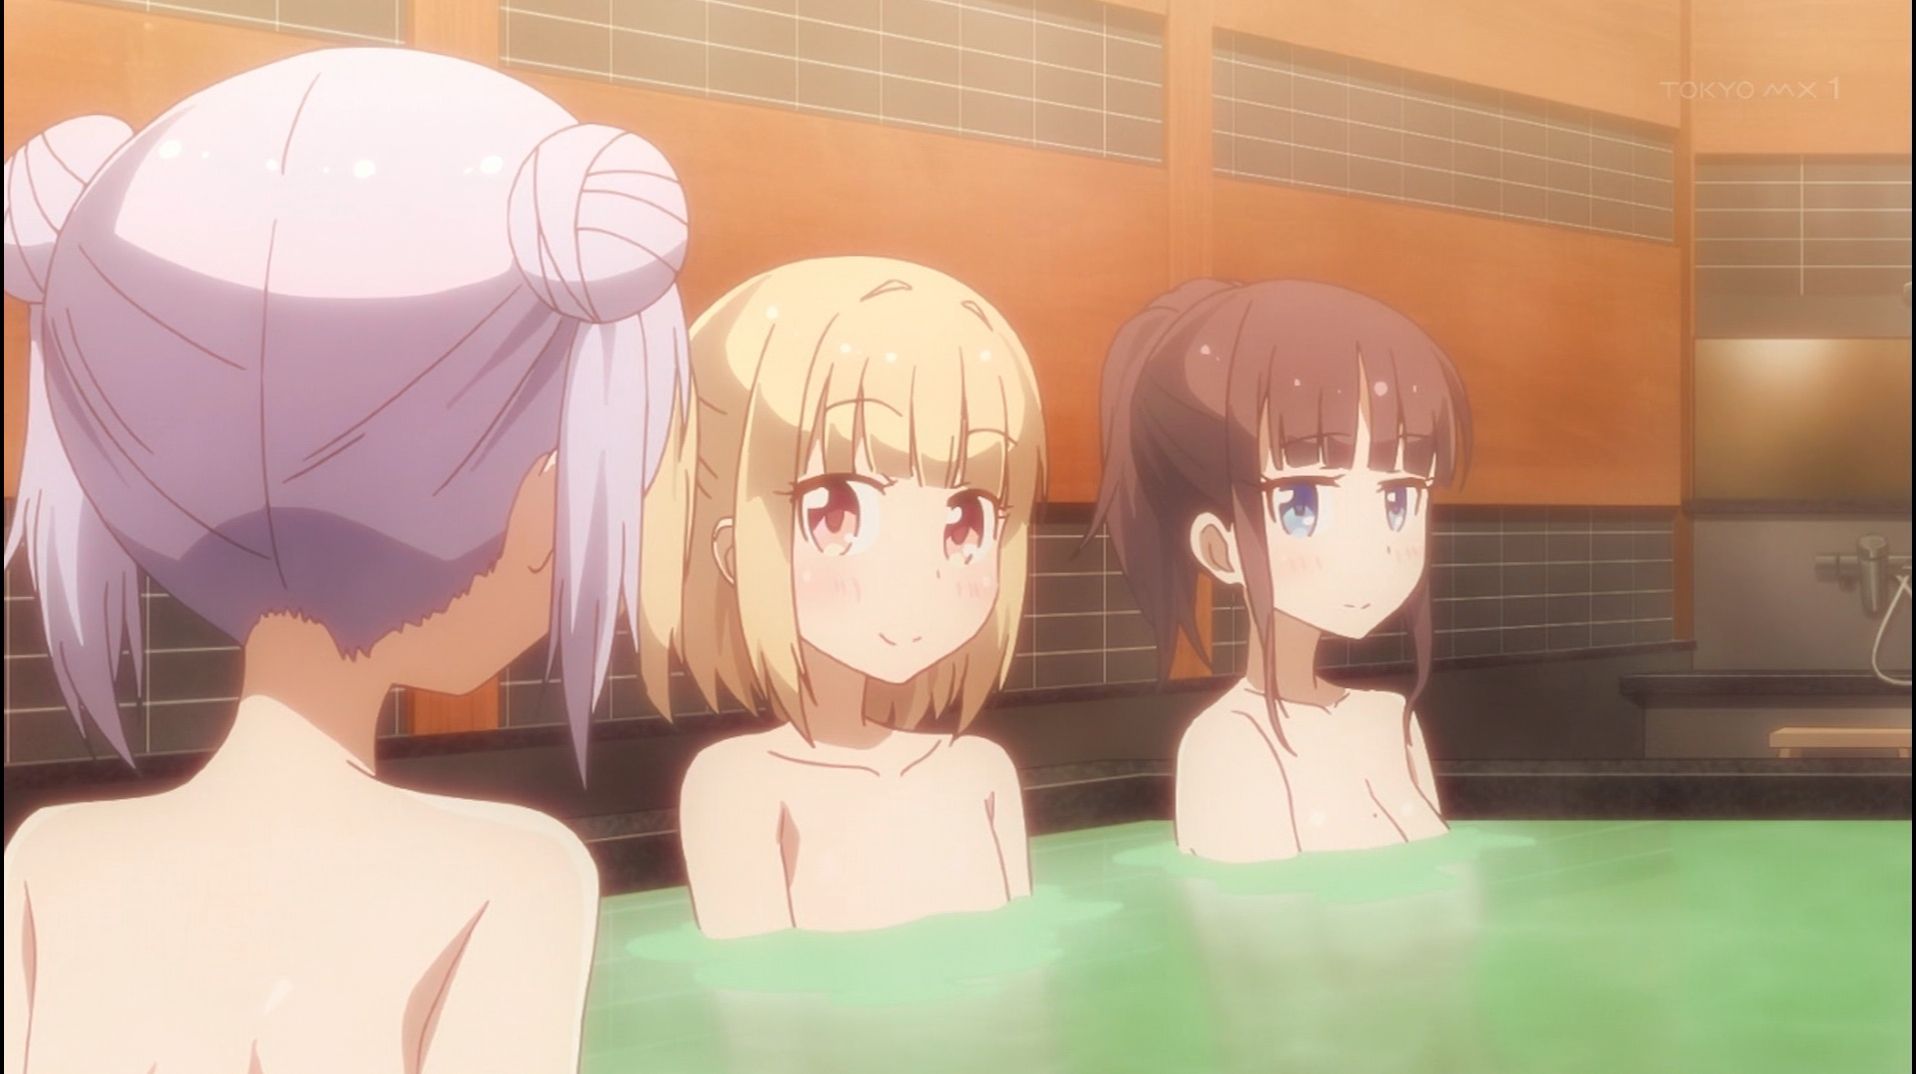 [Artificial mouth times] "NEW GAME! "Of all nine episodes, Yuri hifumi nude too たまらな of wwwwwwwww 14